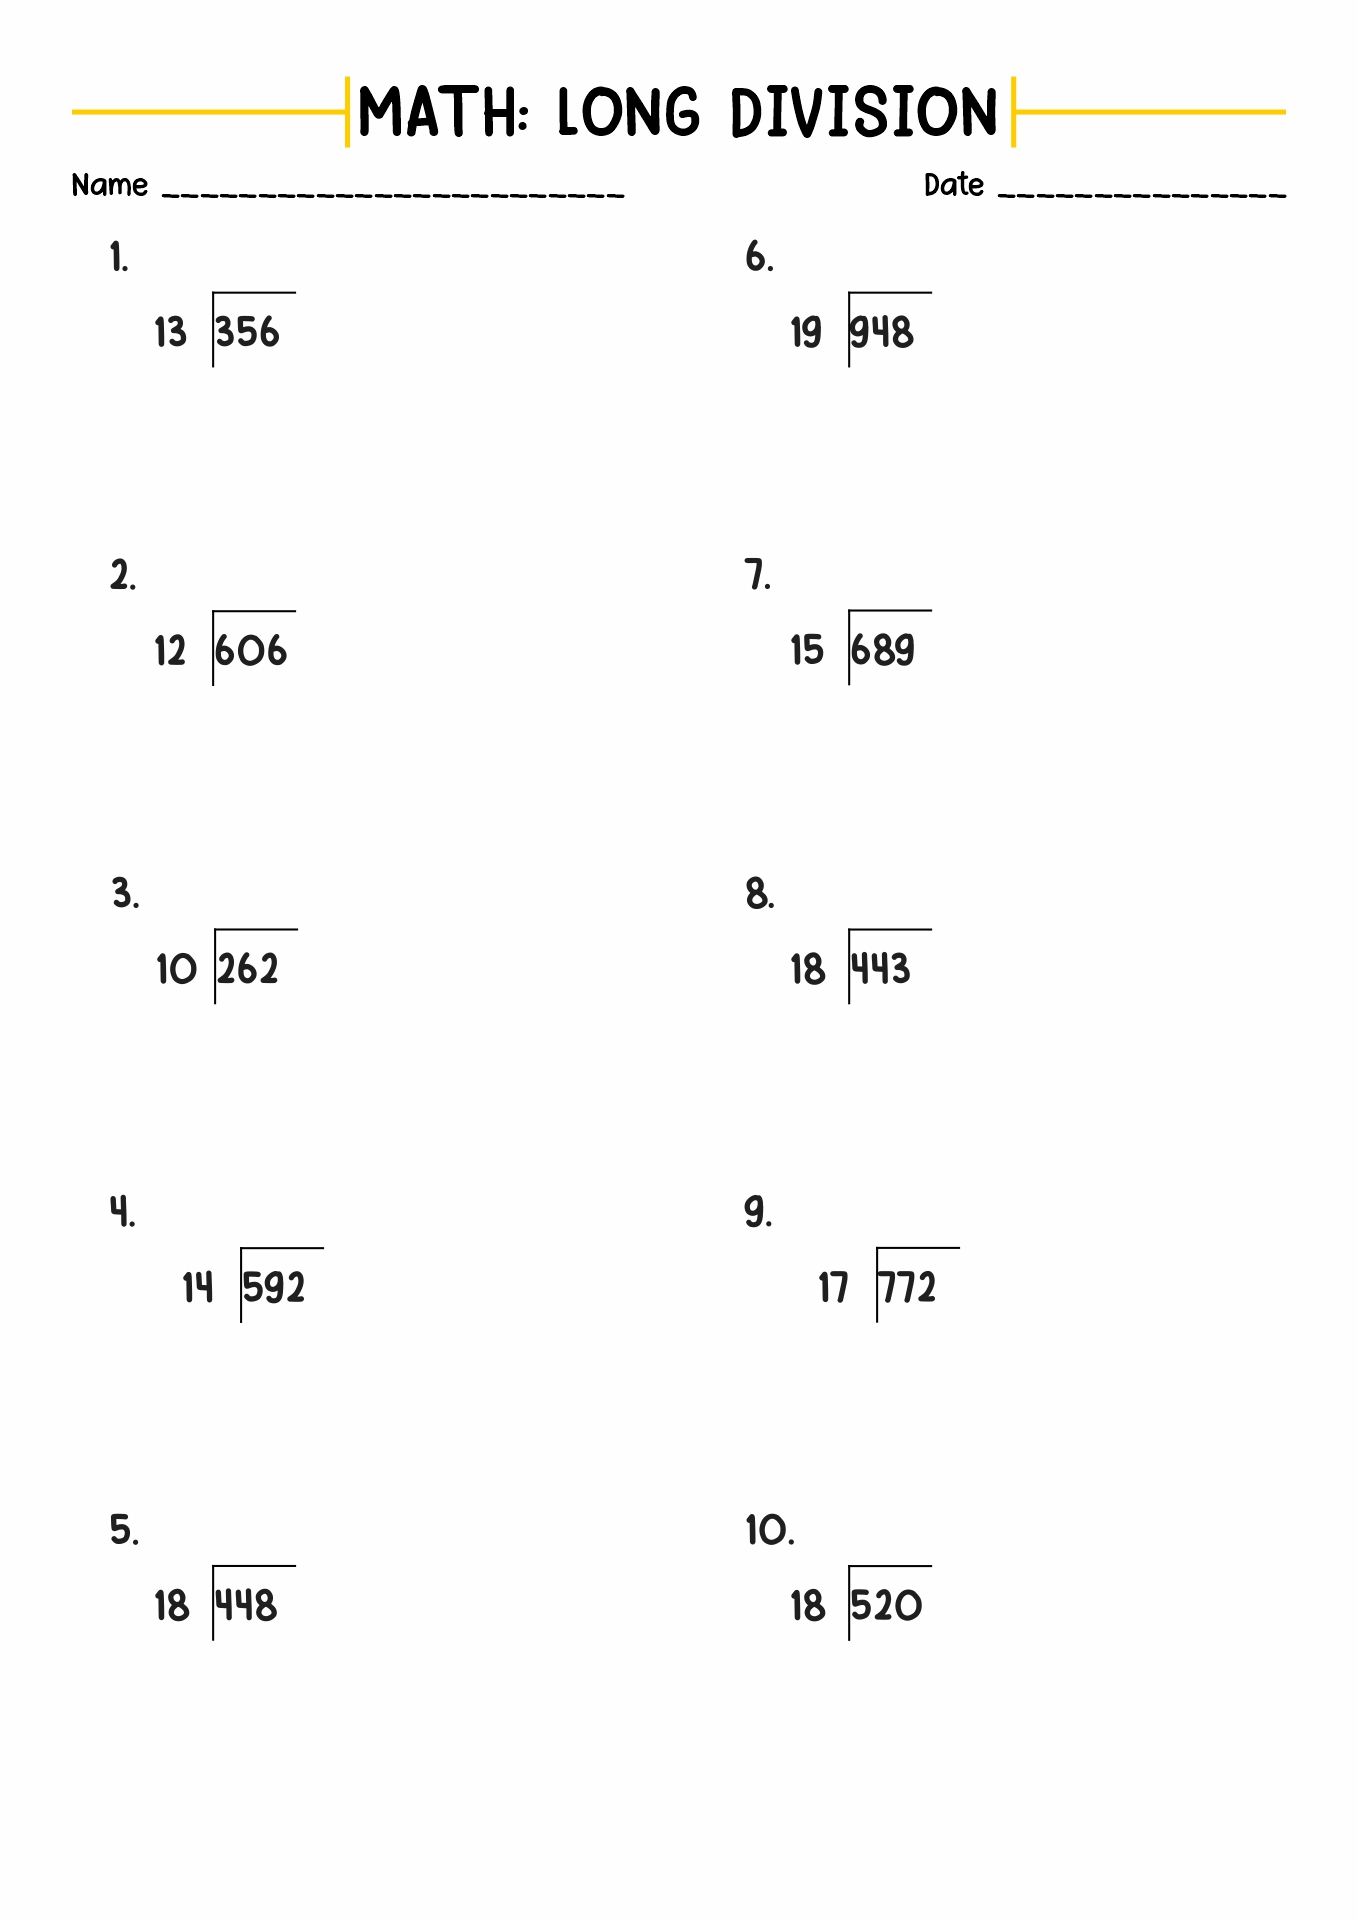 long-division-two-digit-divisor-and-a-three-digit-quotient-with-no